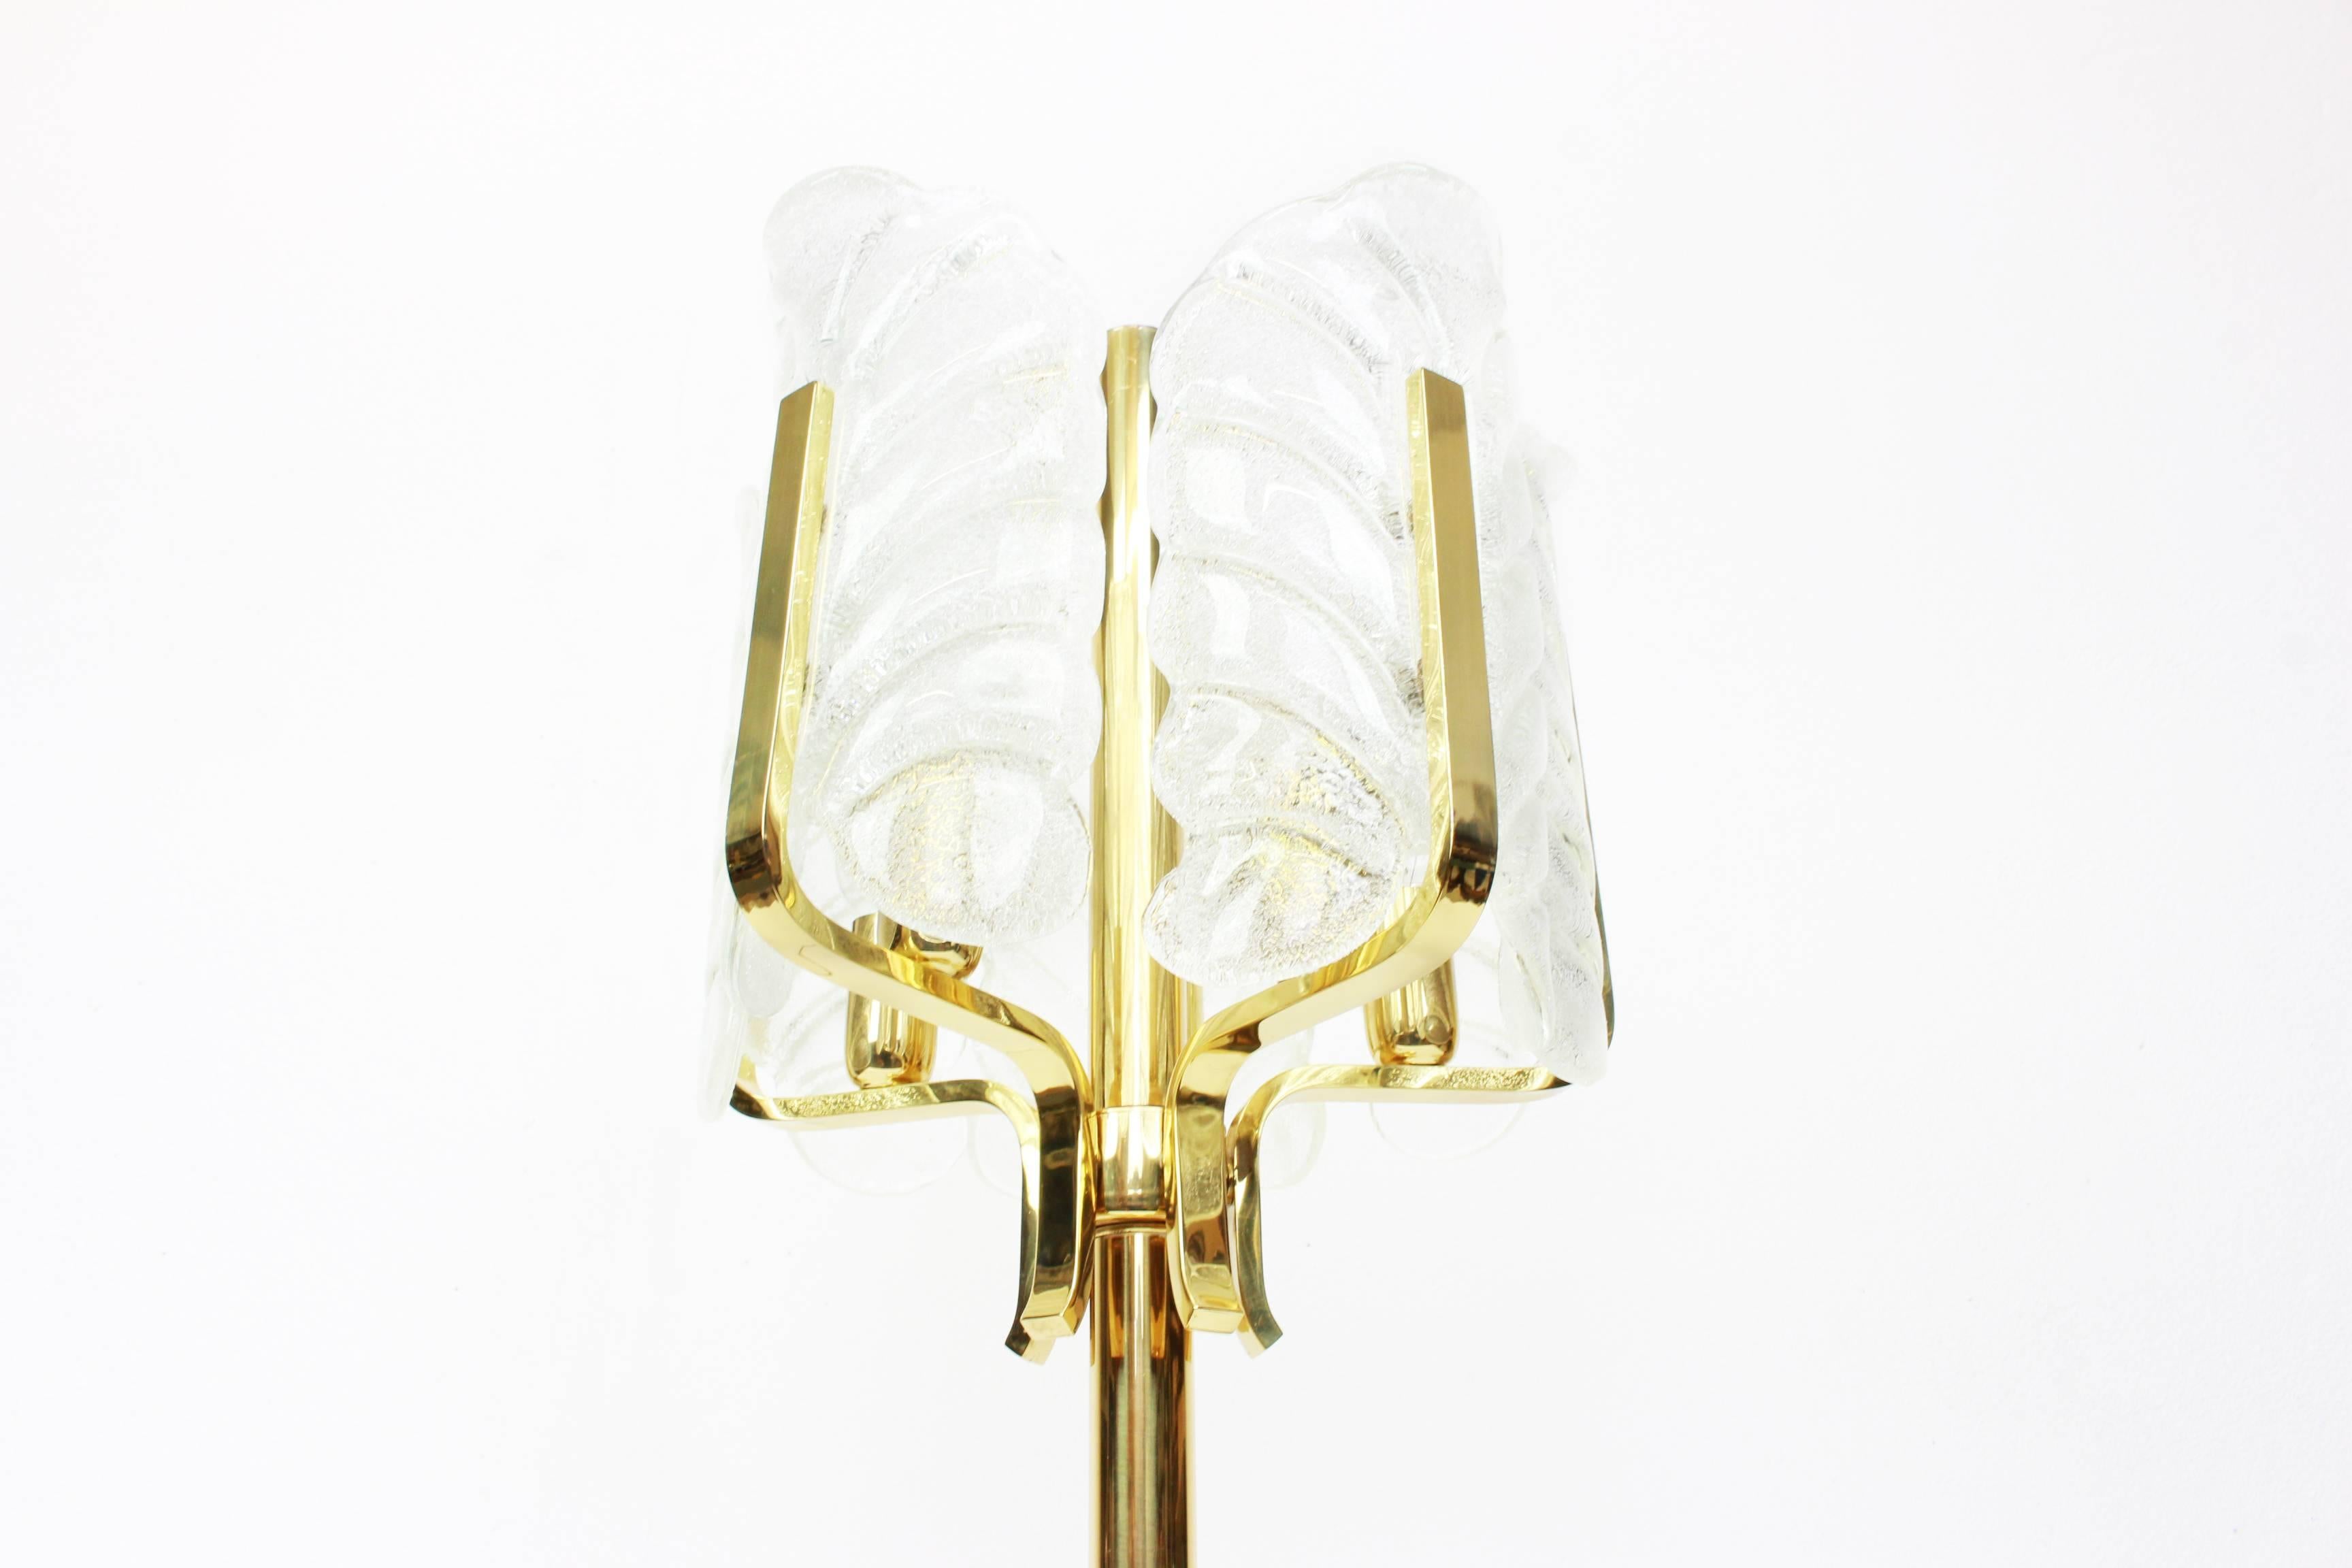 Very glamorous table lamp designed by Carl Fagerlund for Orrefors glass, Sweden, manufactured in Mid-Century, circa 1960-1969. The light features a polished brass frame with five stunning Orrefors glass leaves which have a matte frosted relief on